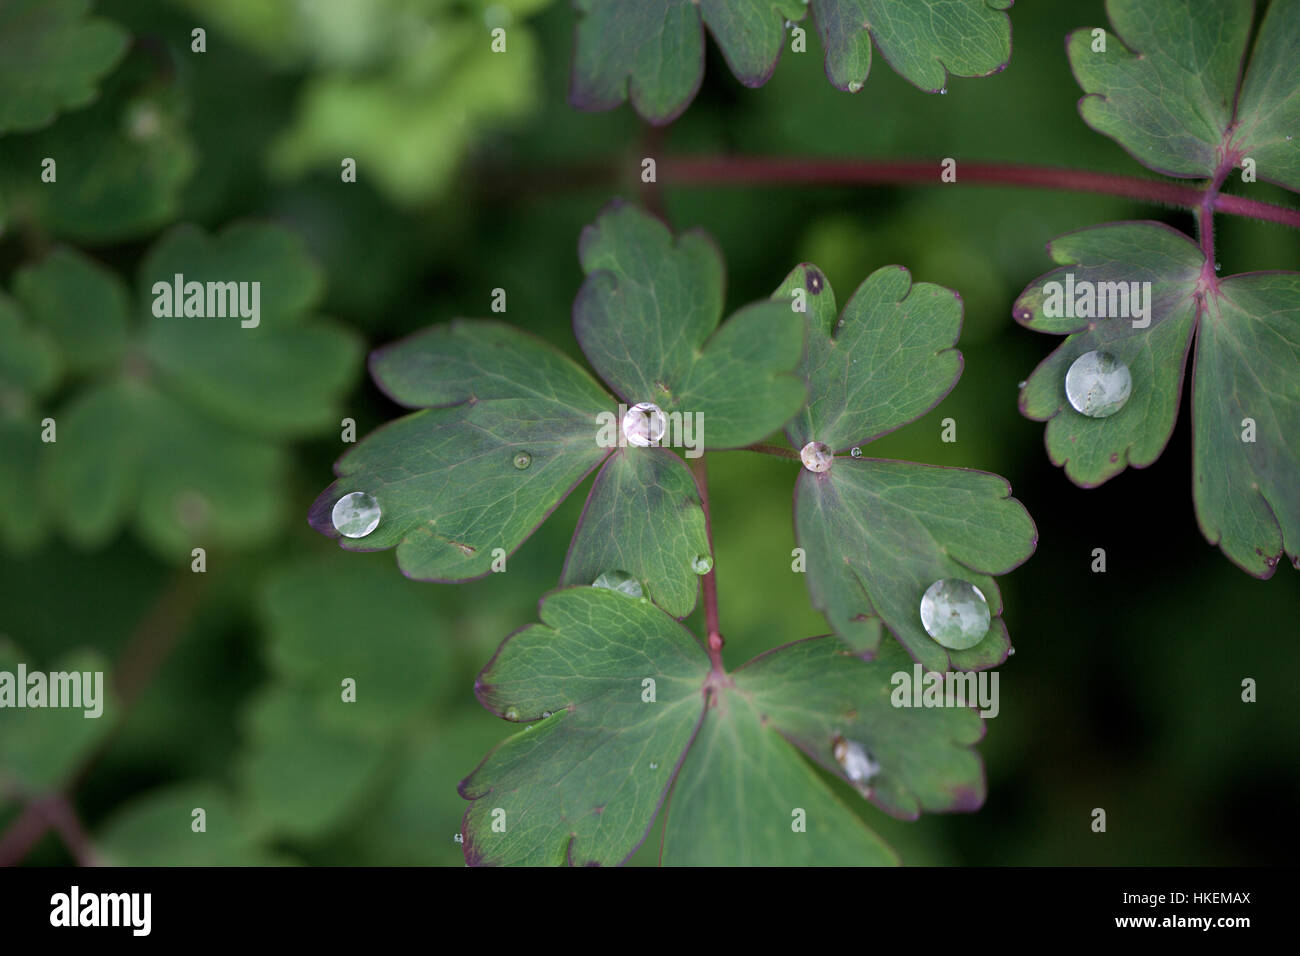 water droplets on leaves. nature, green, plant, raindrop. Stock Photo